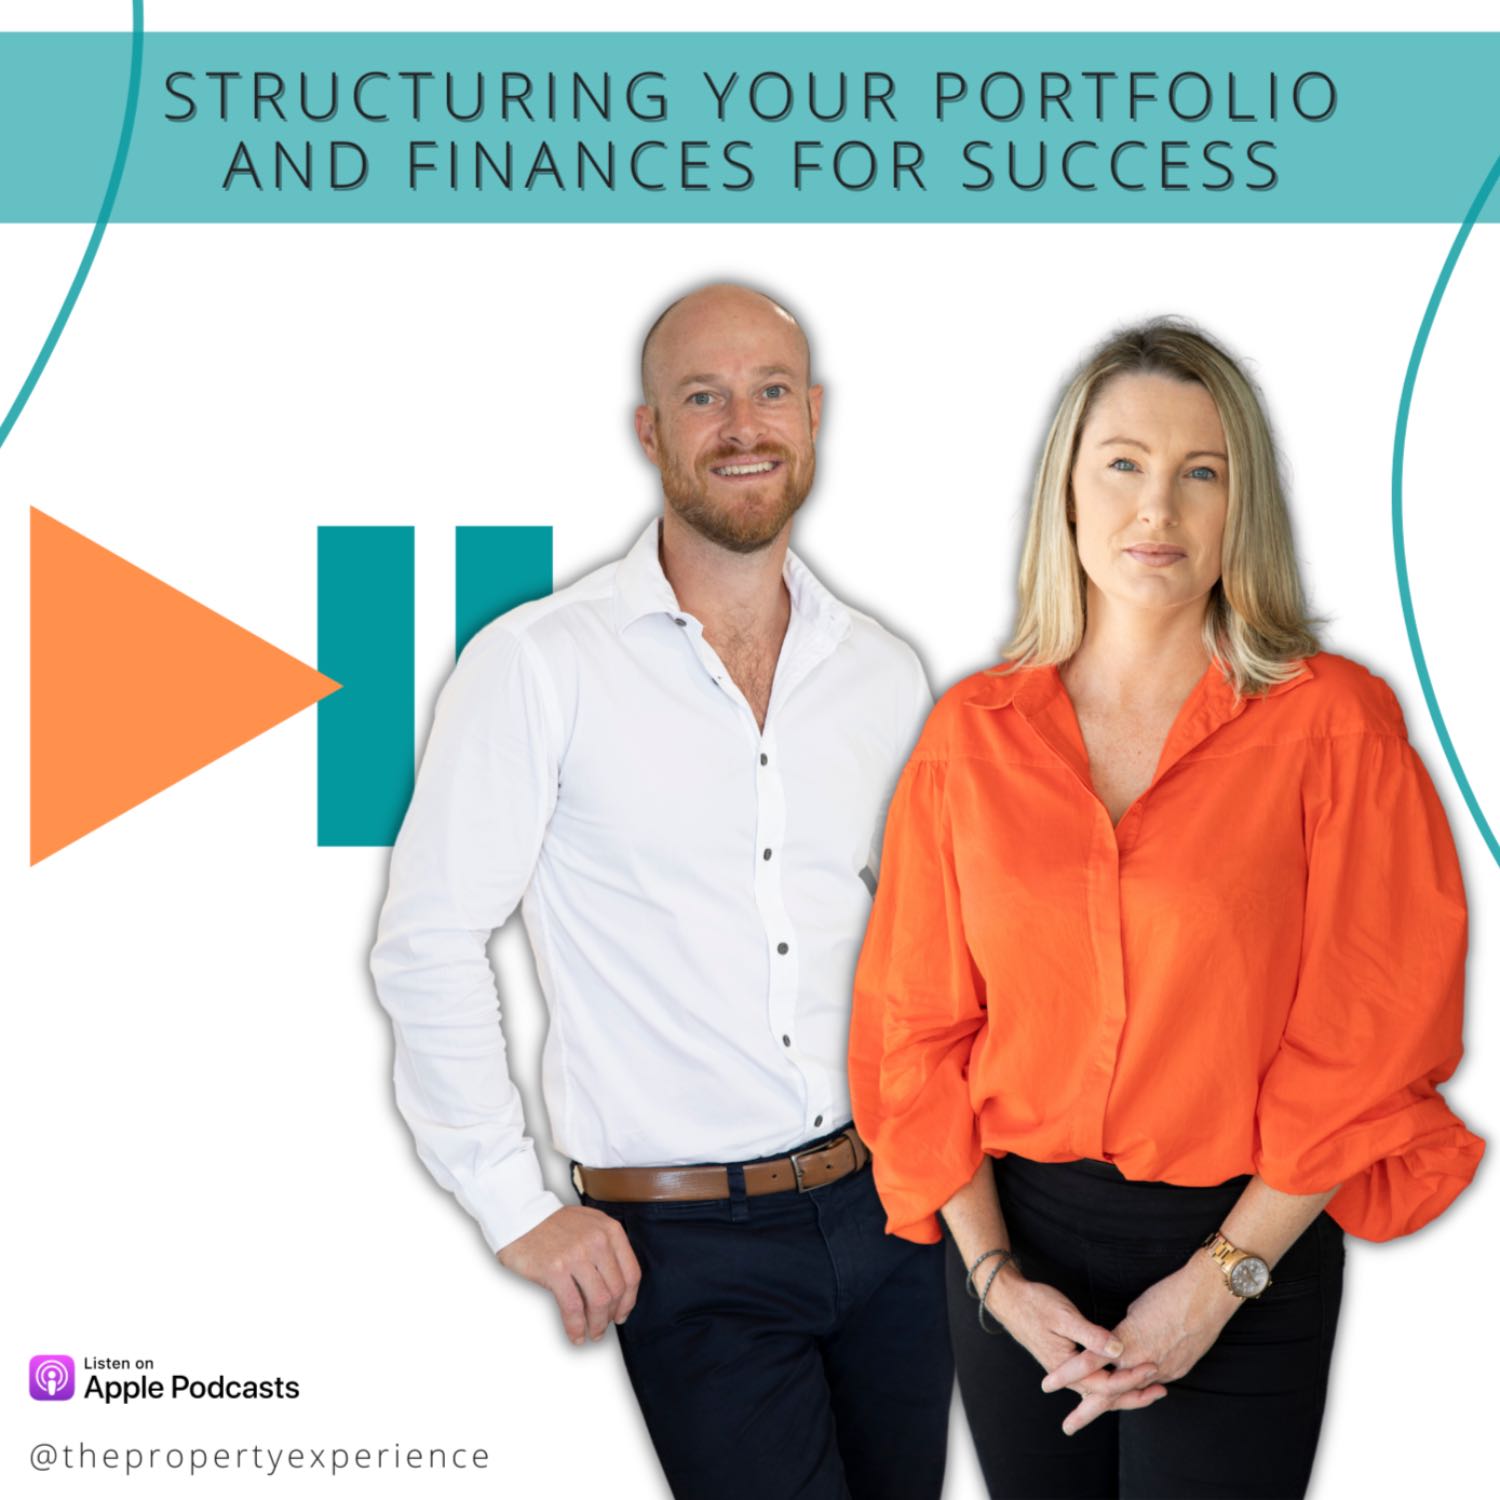 Structuring your portfolio and finances for success - The Property Experience Podcast